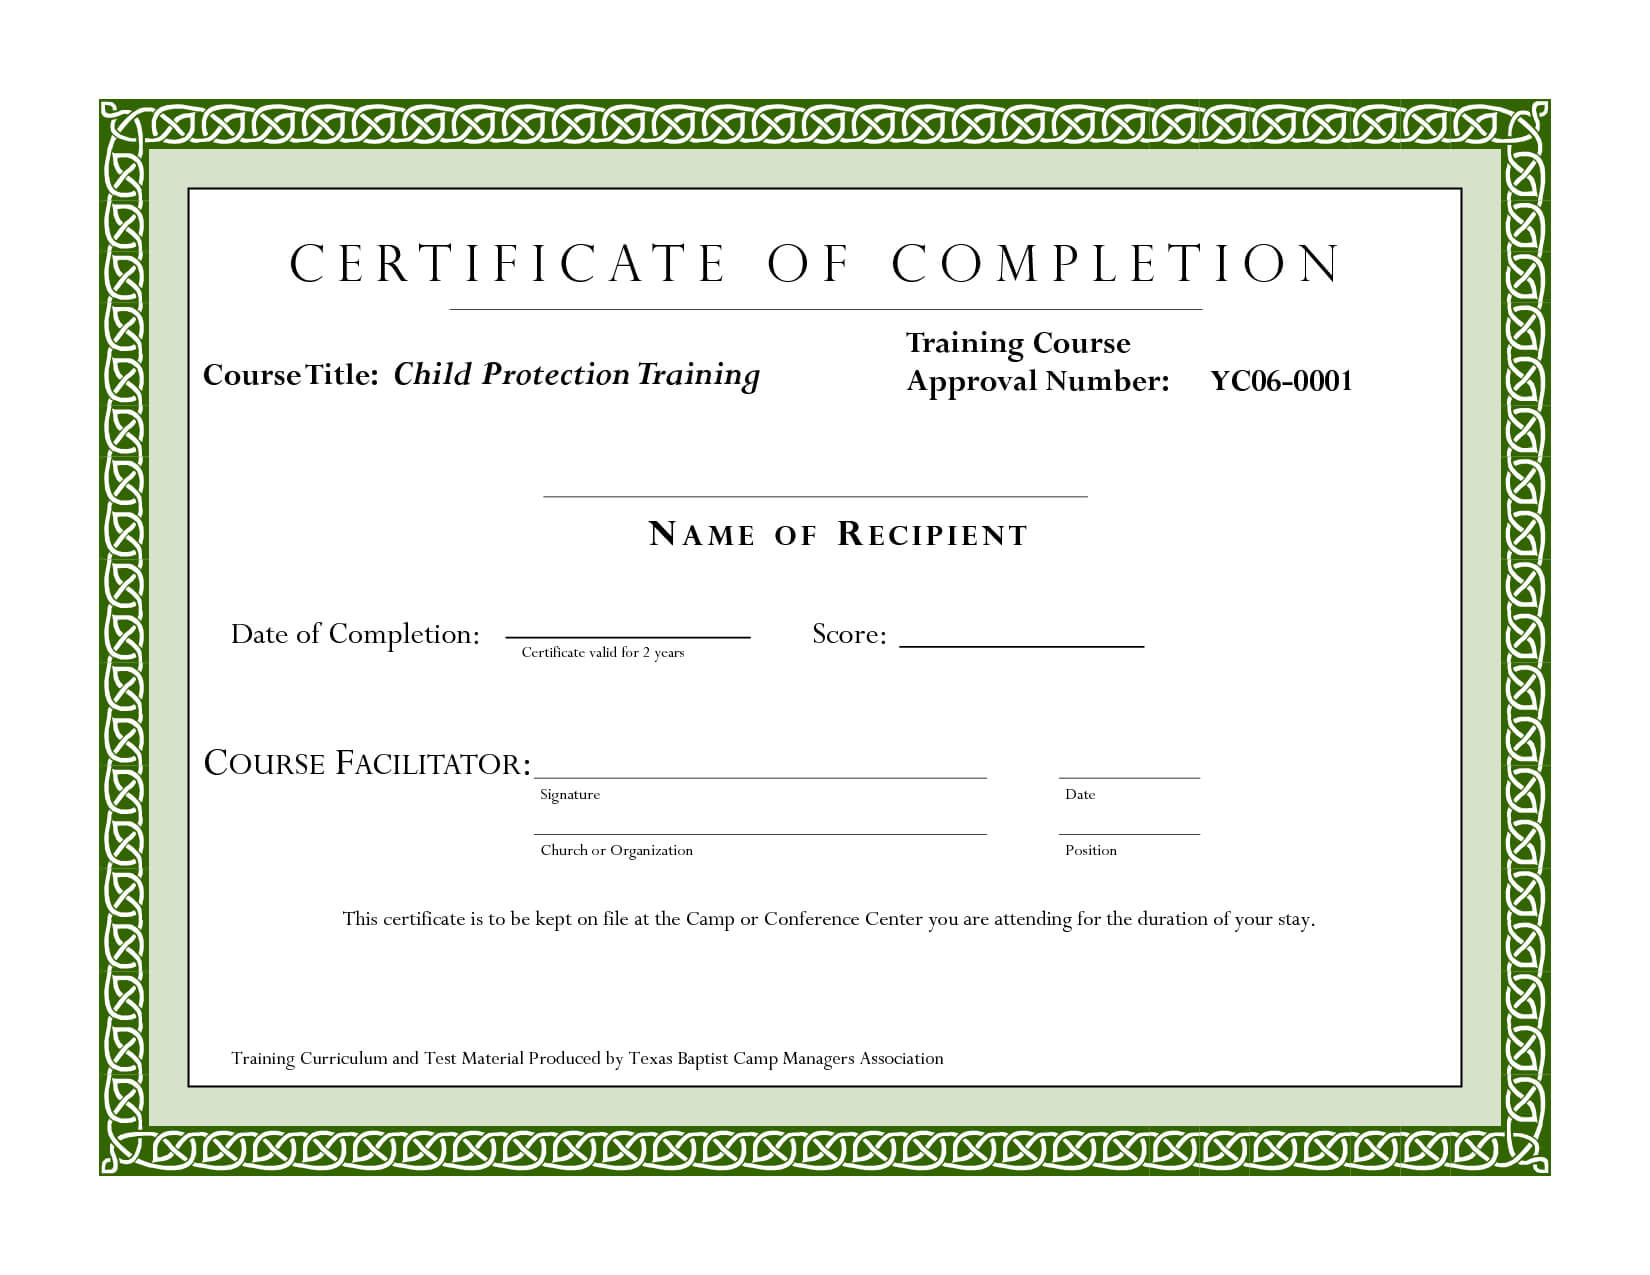 Course Completion Certificate Template | Certificate Of Throughout Certificate Template For Project Completion